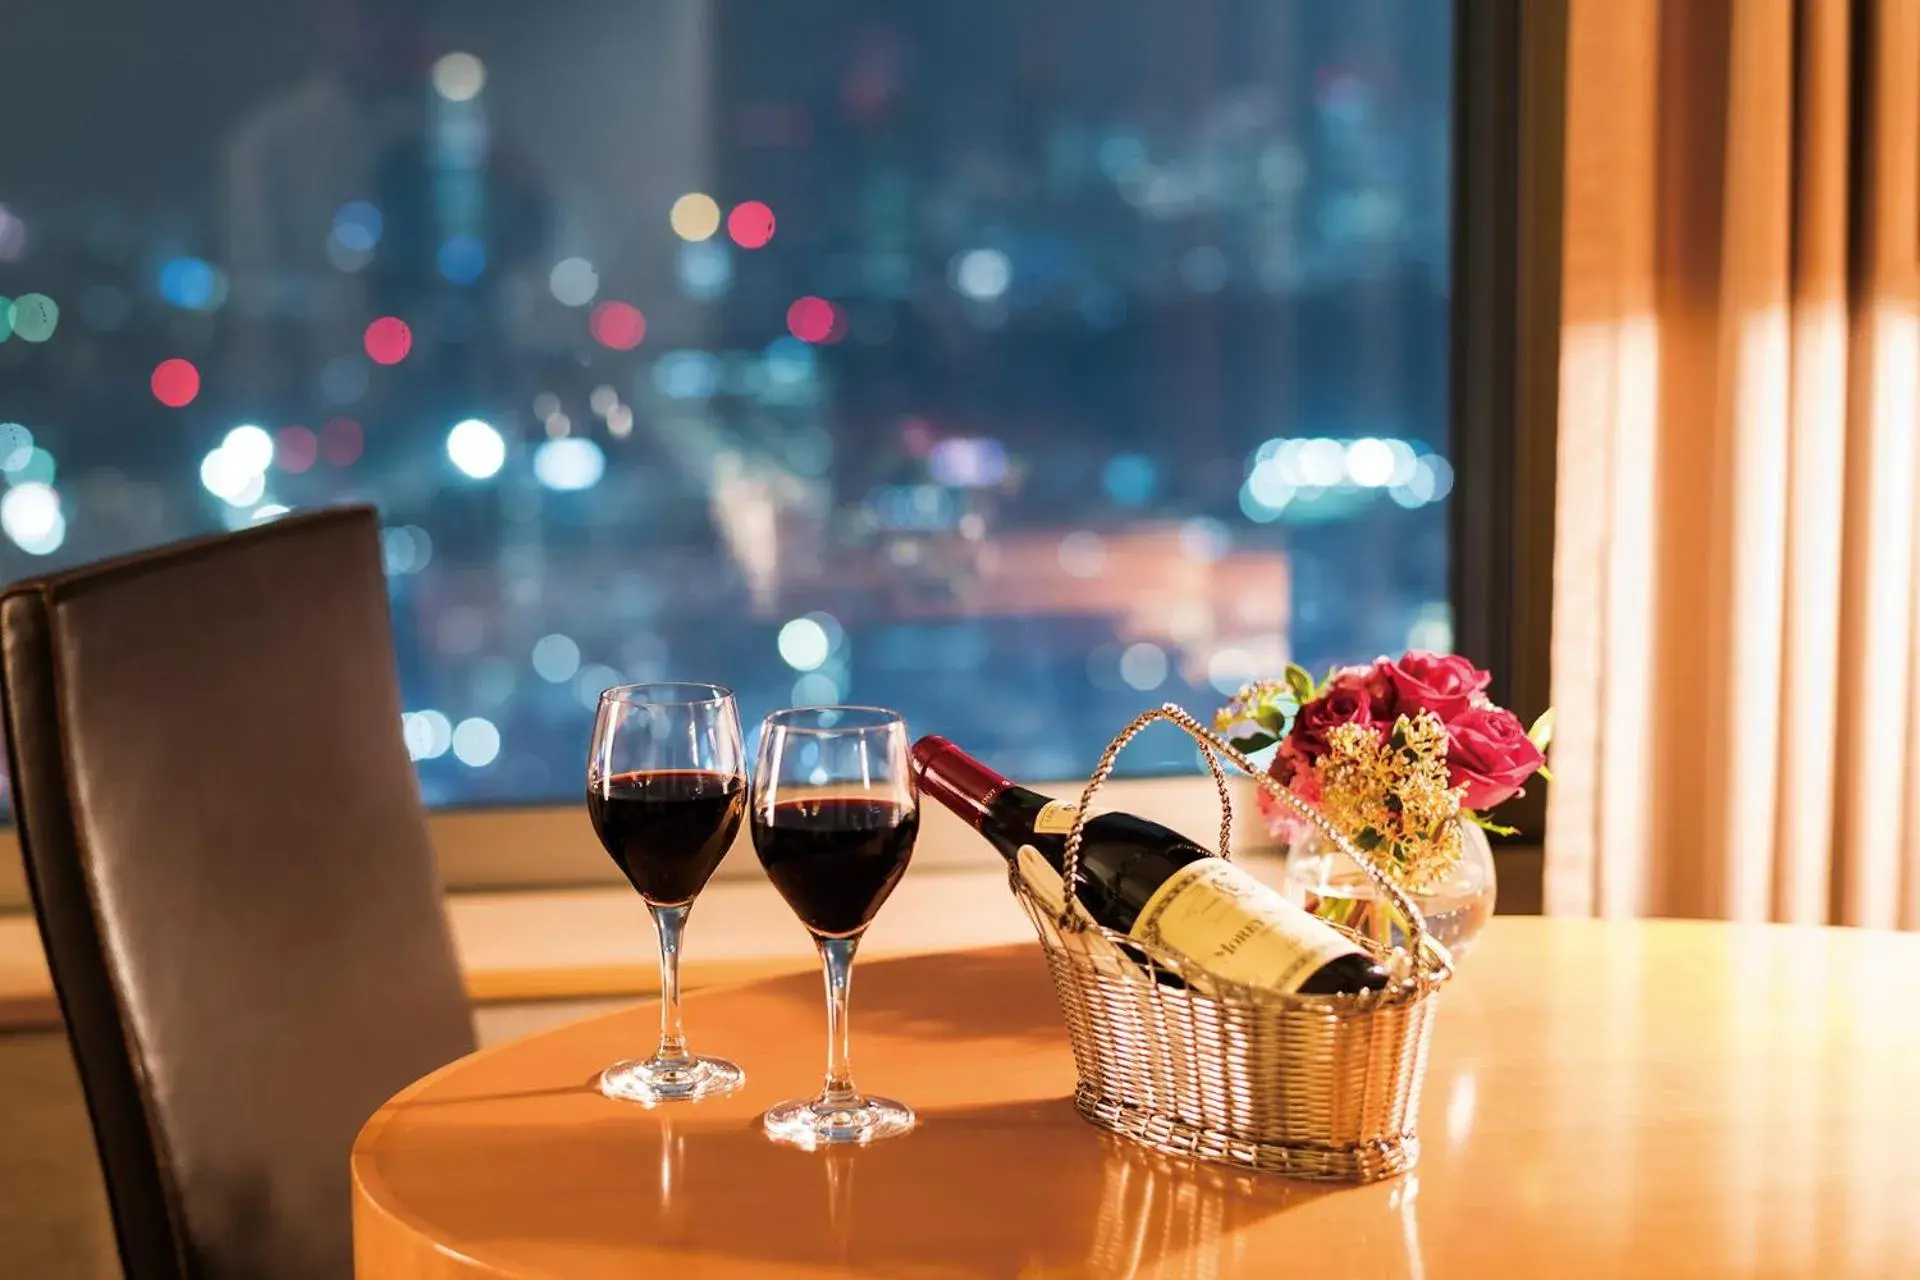 City view in Cerulean Tower Tokyu Hotel, A Pan Pacific Partner Hotel